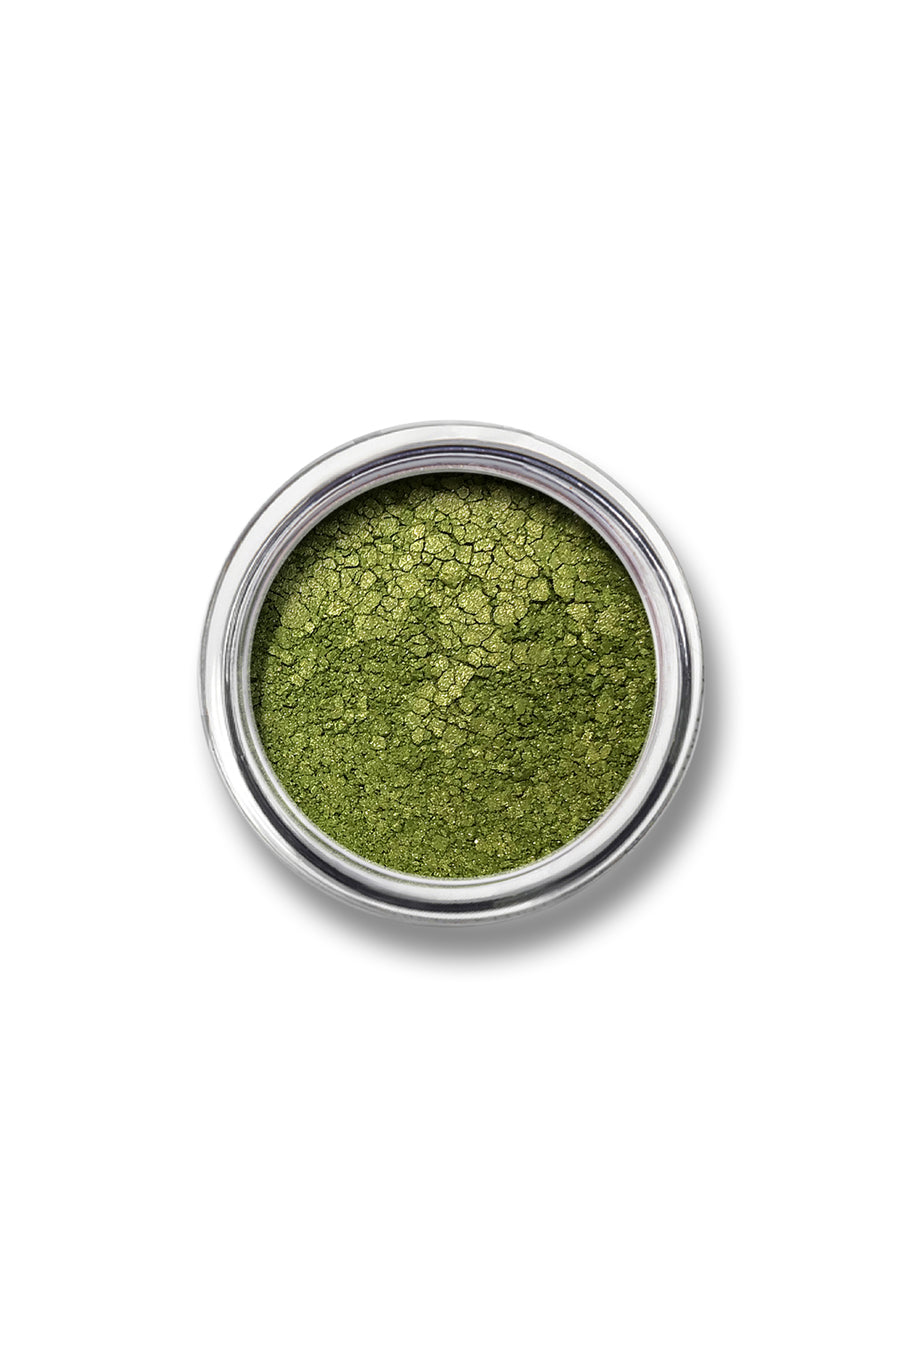 Shimmer Eyeshadow #16 - Olive Green - Blend Mineral Cosmetics